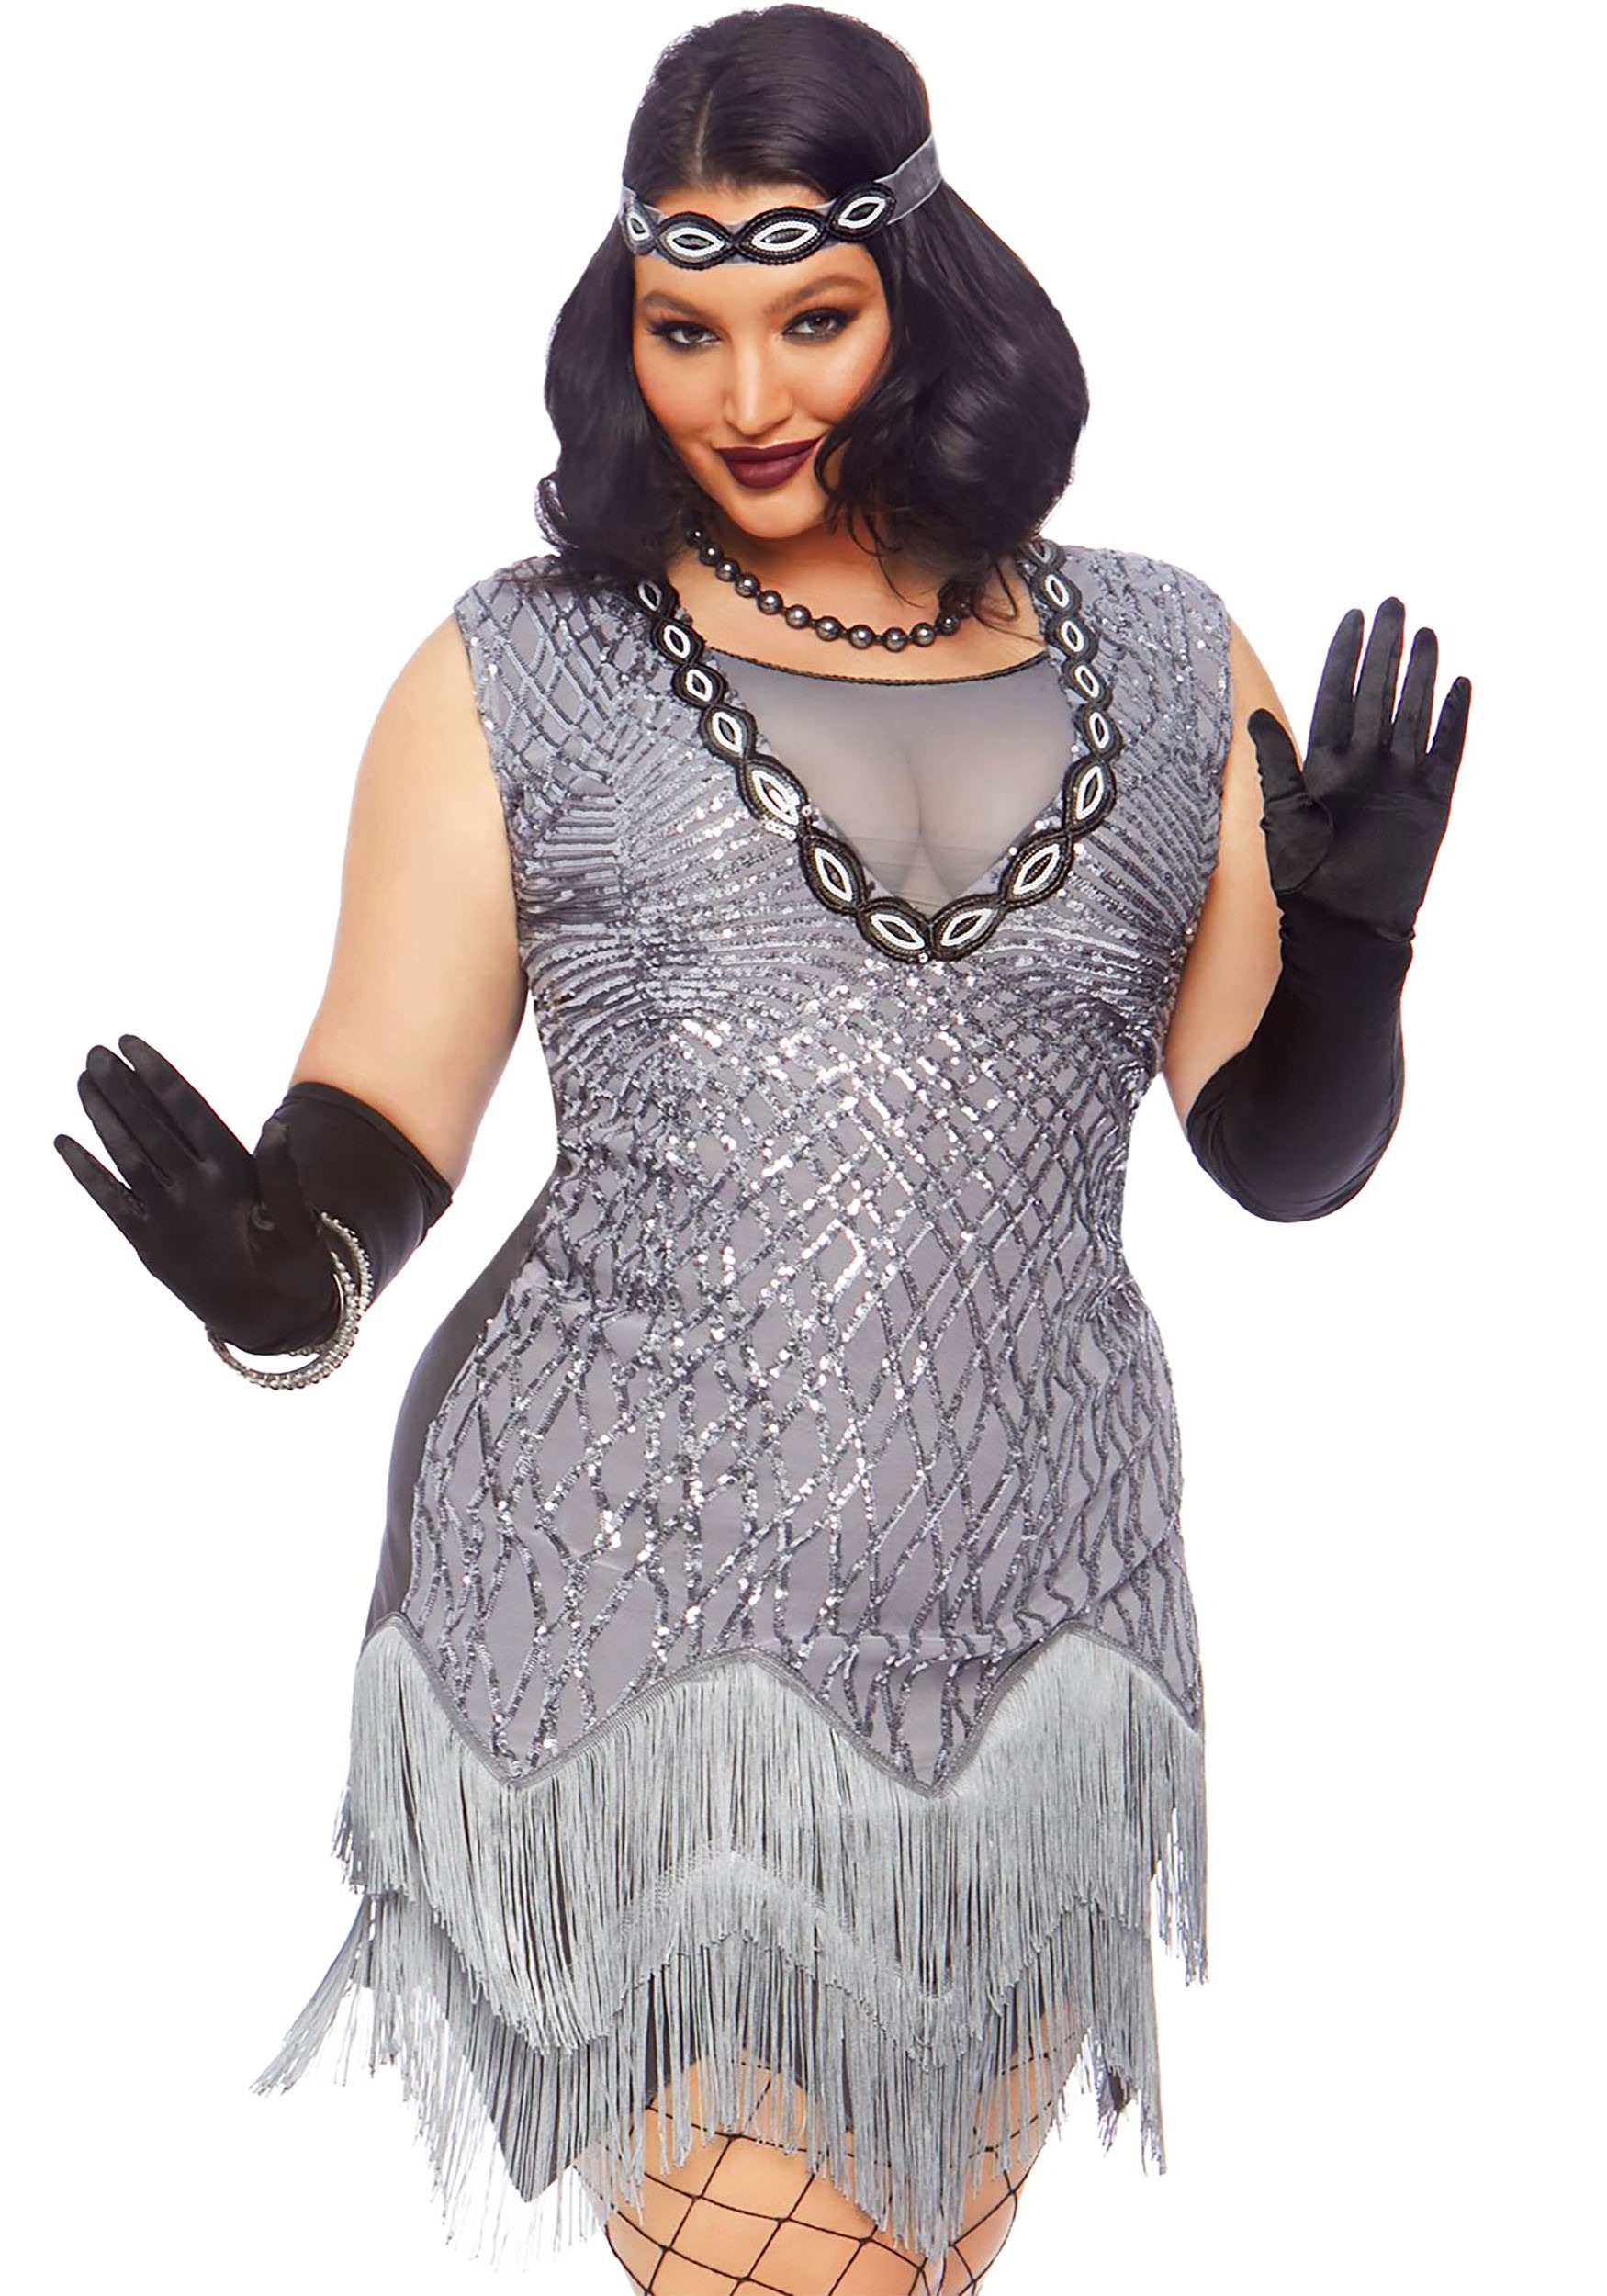 Plus Size Roaring Roxy Flapper Costume for Adults